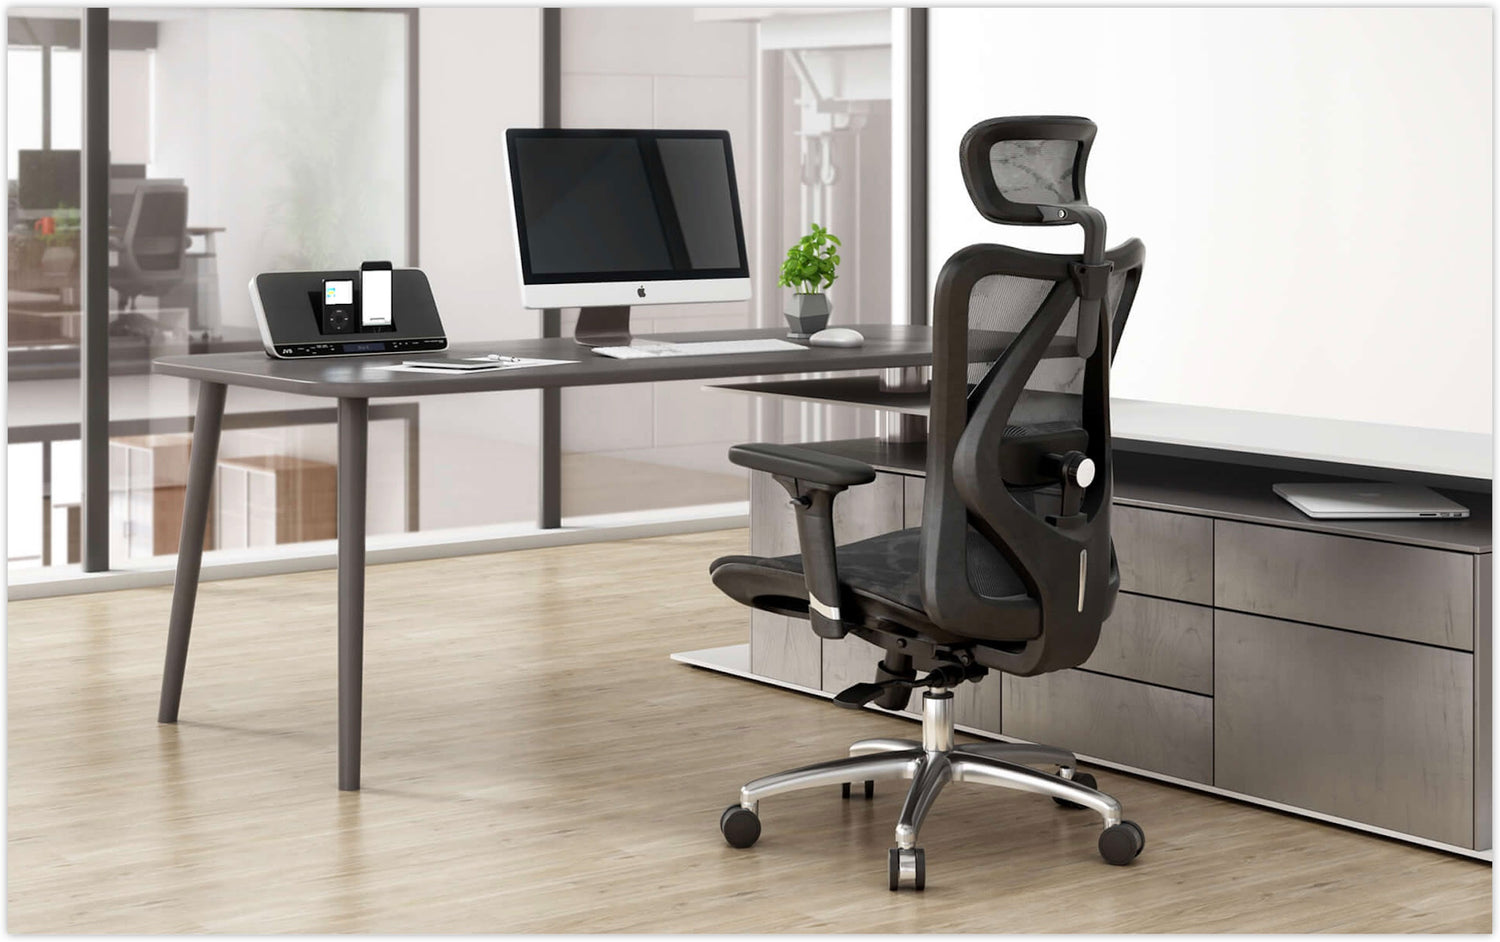 How to choose an office chair? 